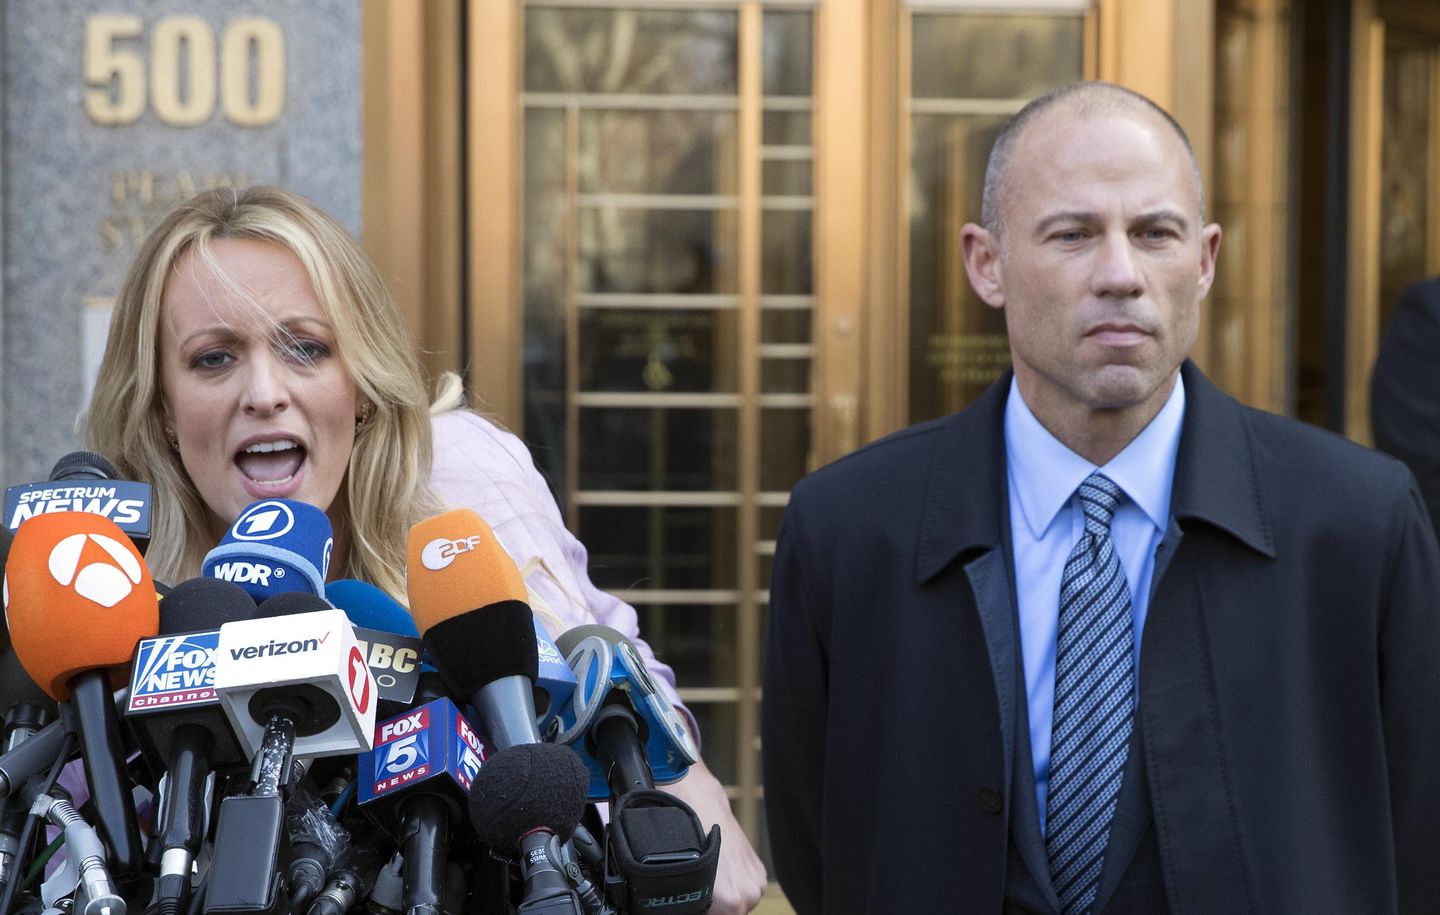 Stormy Daniels says Michael Avenatti flat-out lied about her in fraud case